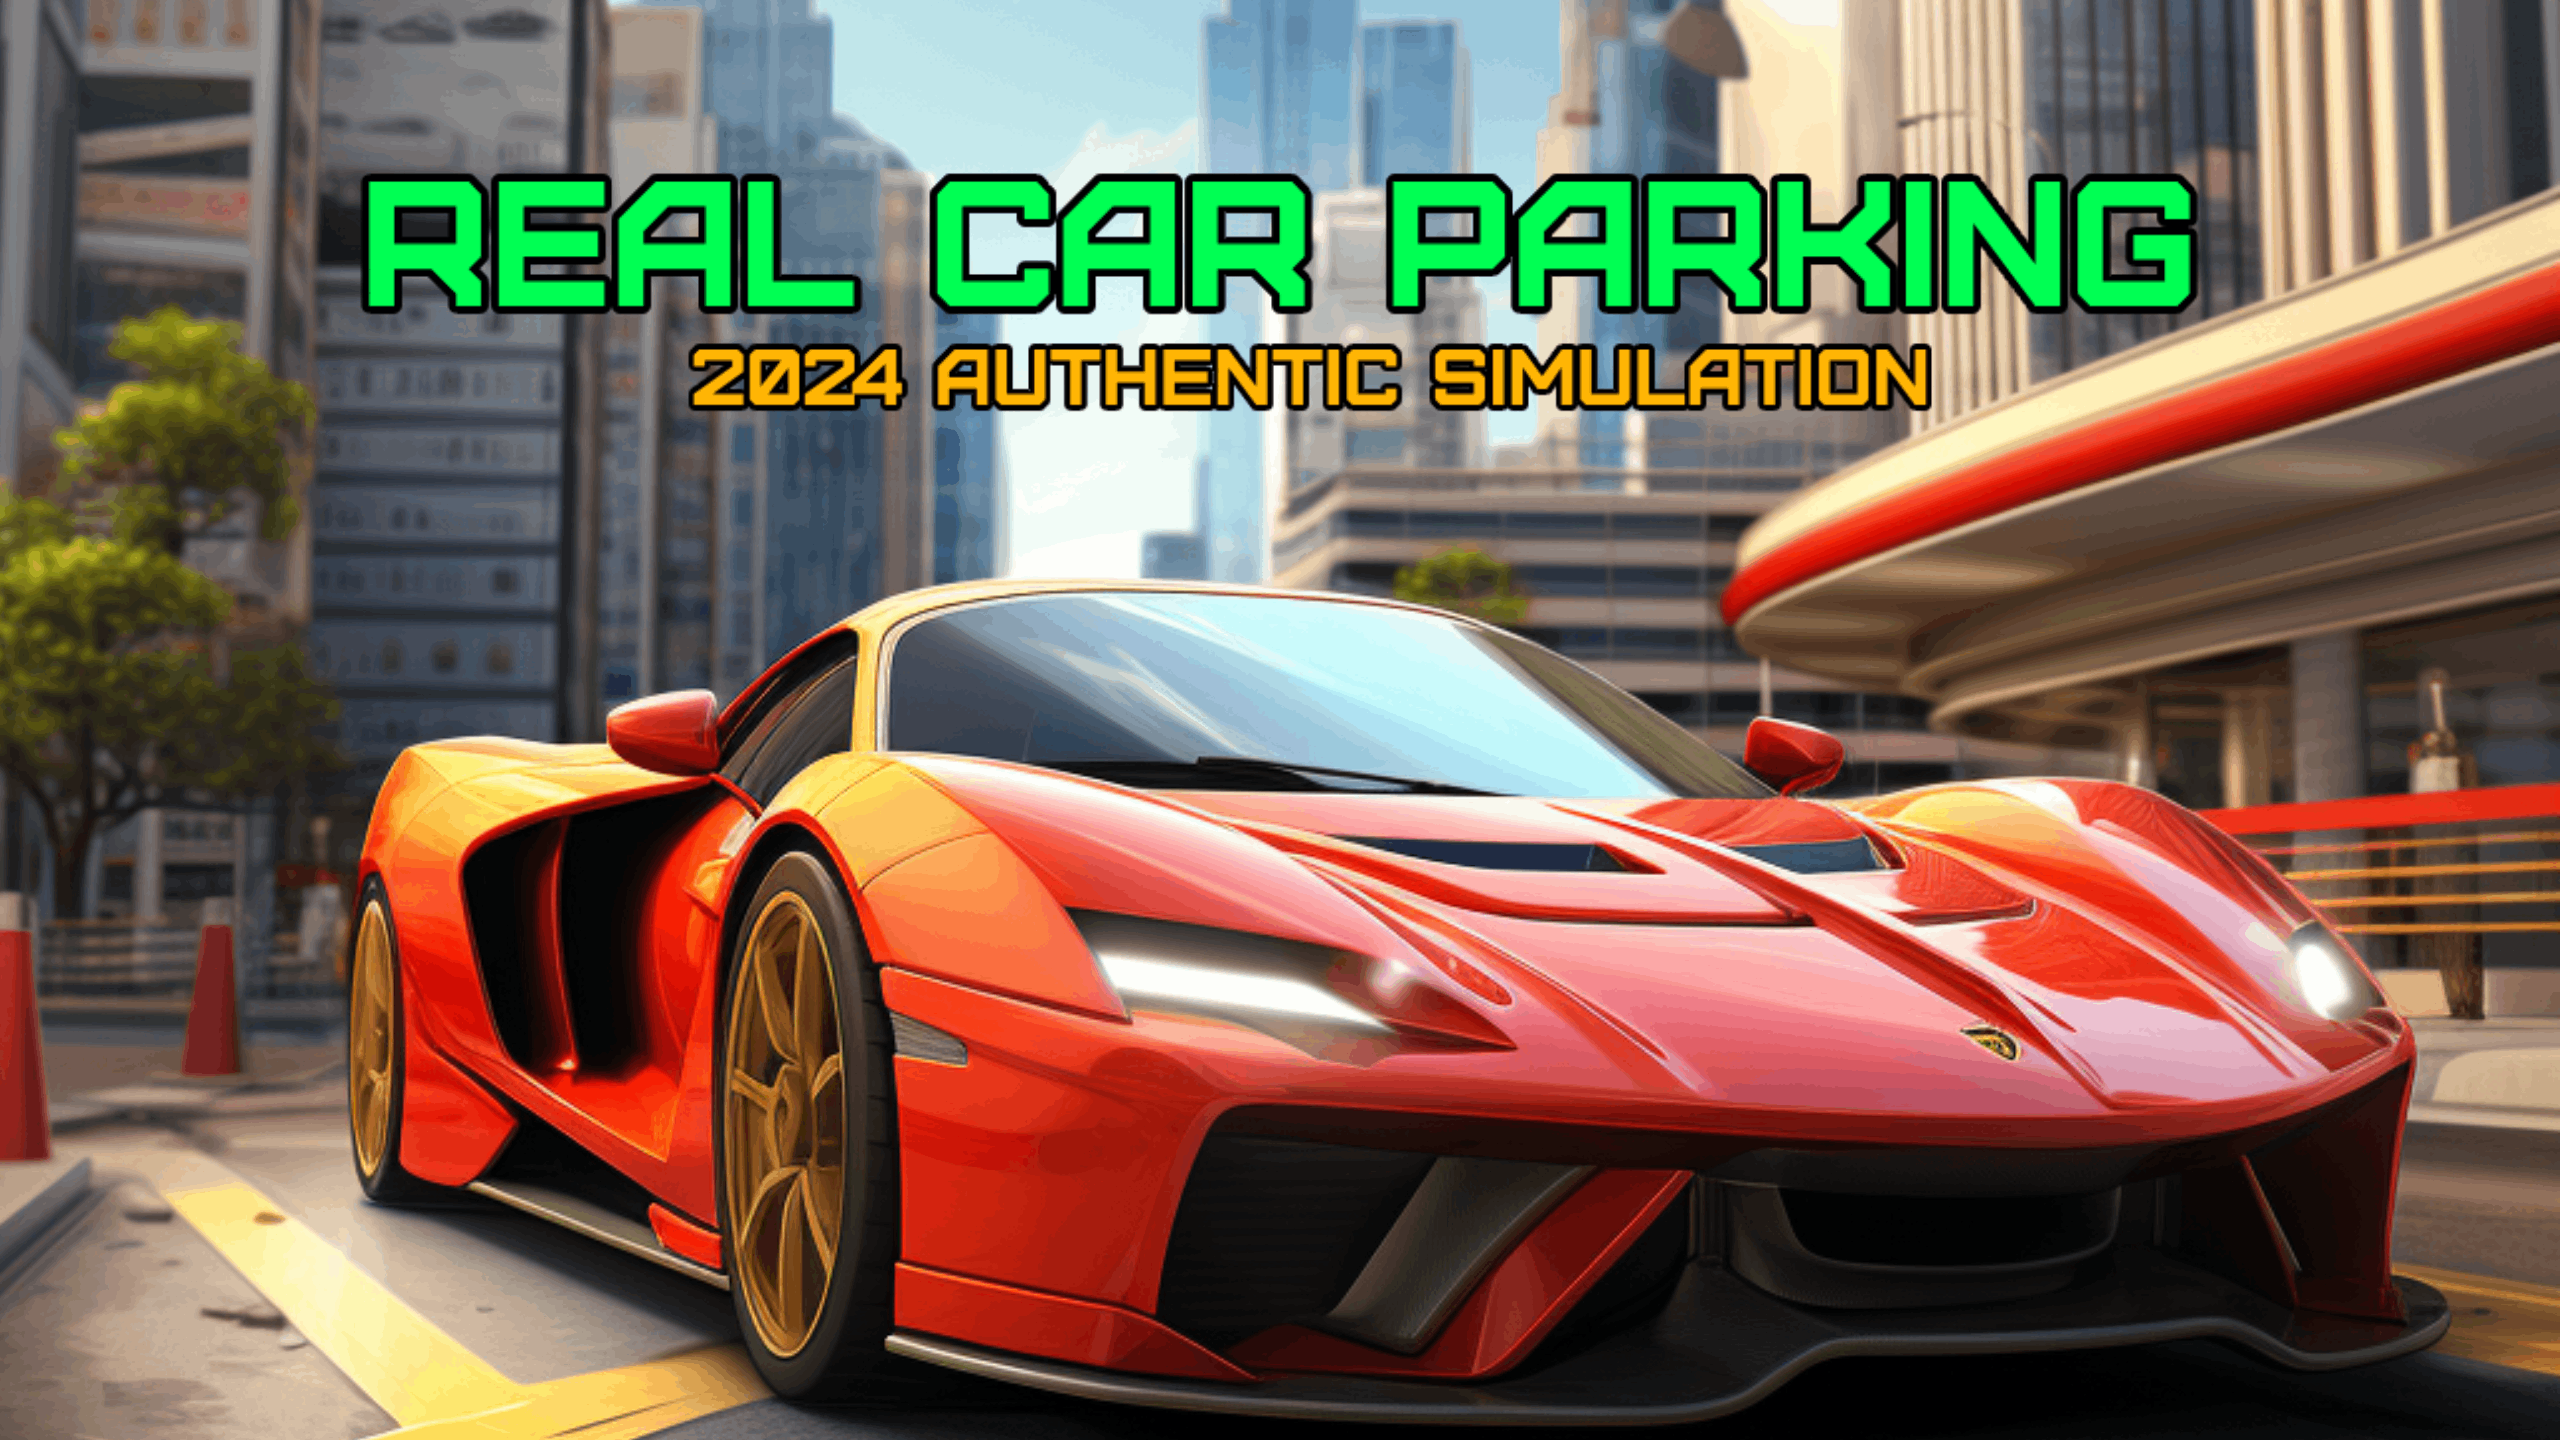 Real Car Parking 2024: Driving Simulator for Nintendo Switch